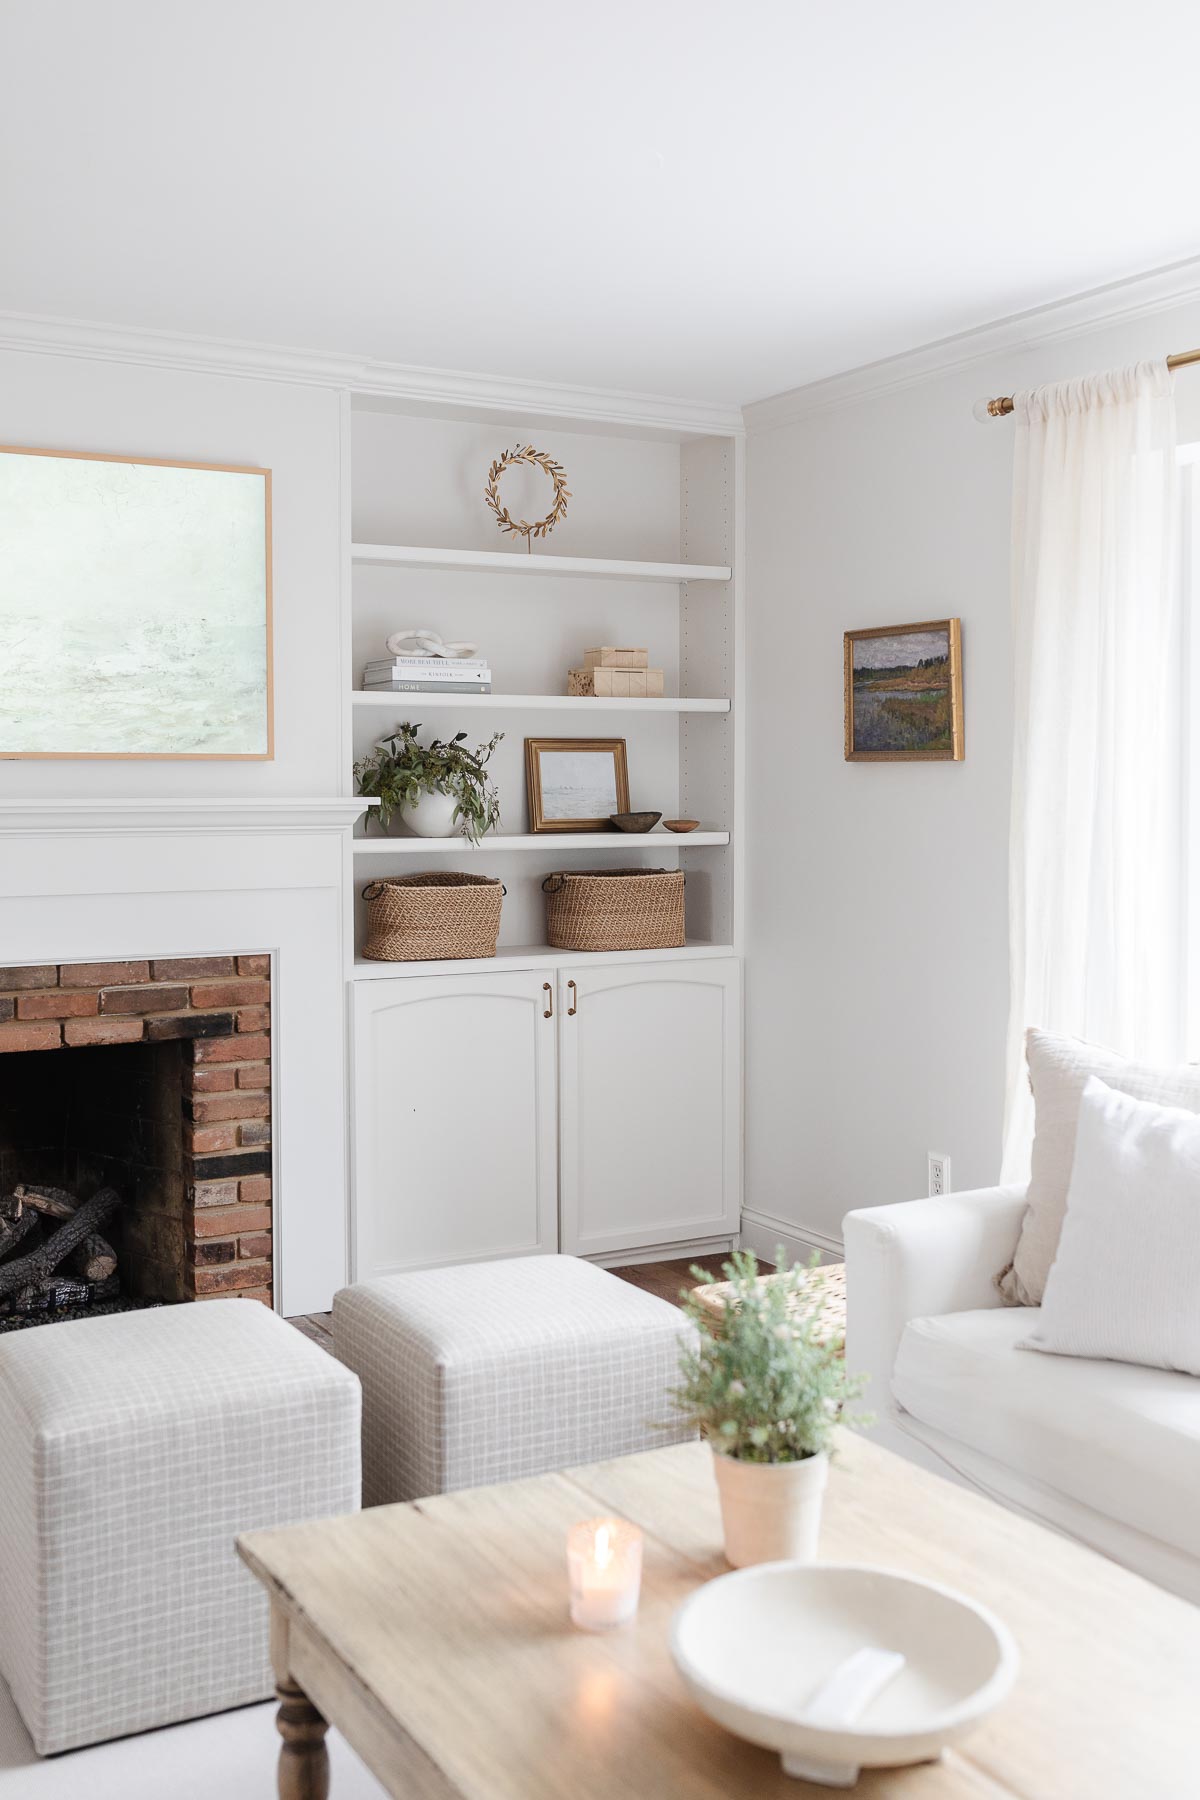 4 Ways to Make Your Home Feel Warm and Cozy  Julie Blanner